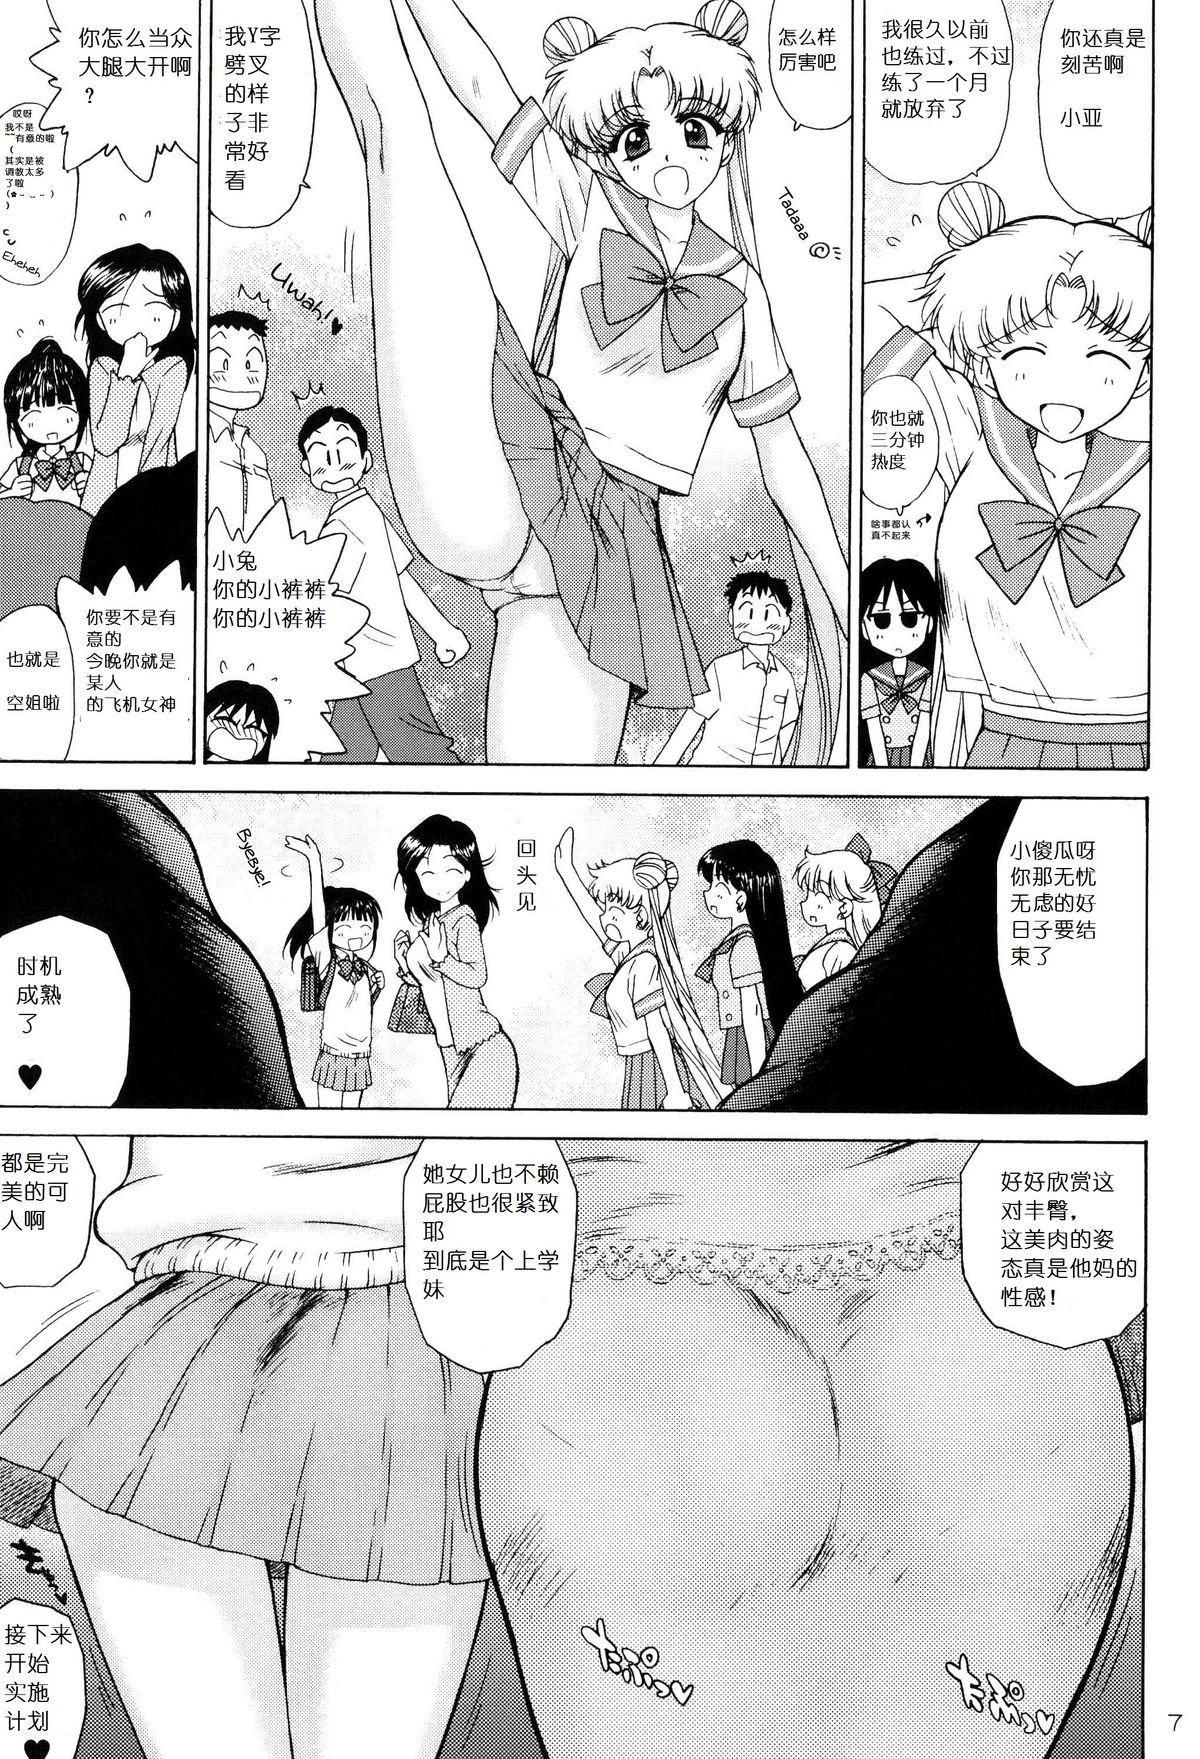 Tall SUBMISSION-SUPER MOON - Sailor moon Fleshlight - Page 7